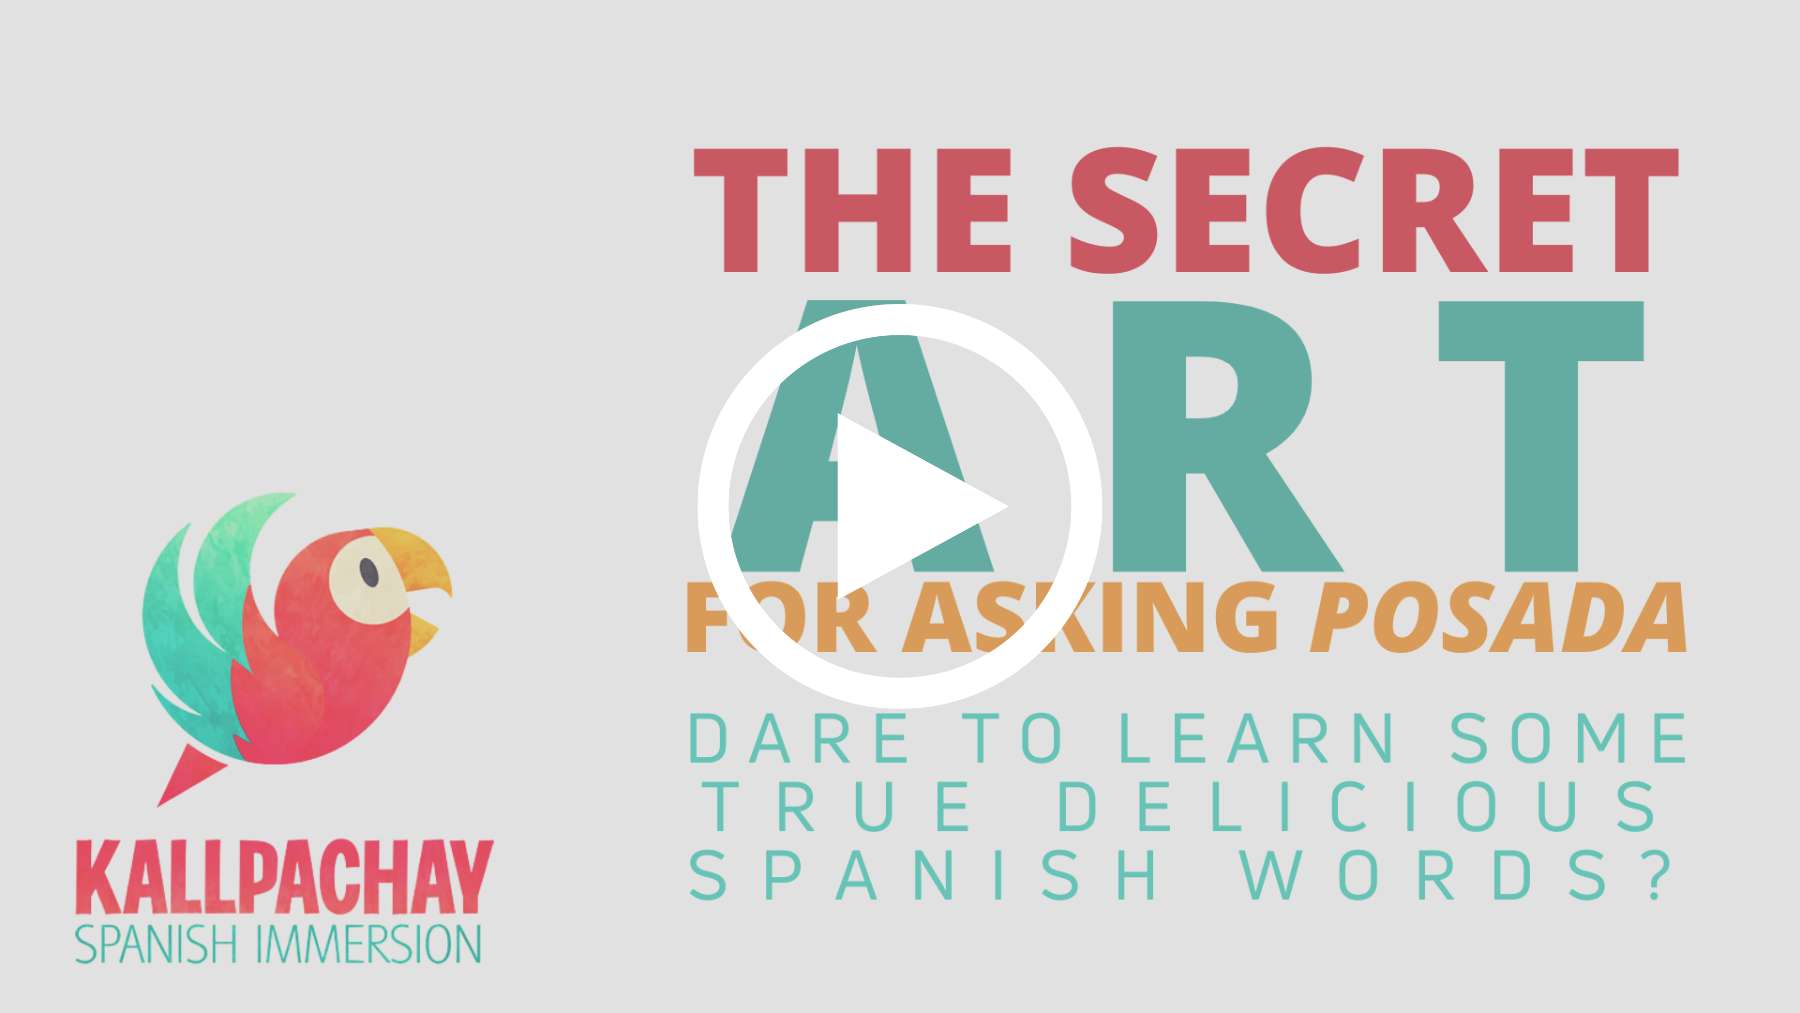 Click to watch a video about The #Secret #Art for Asking #Posada